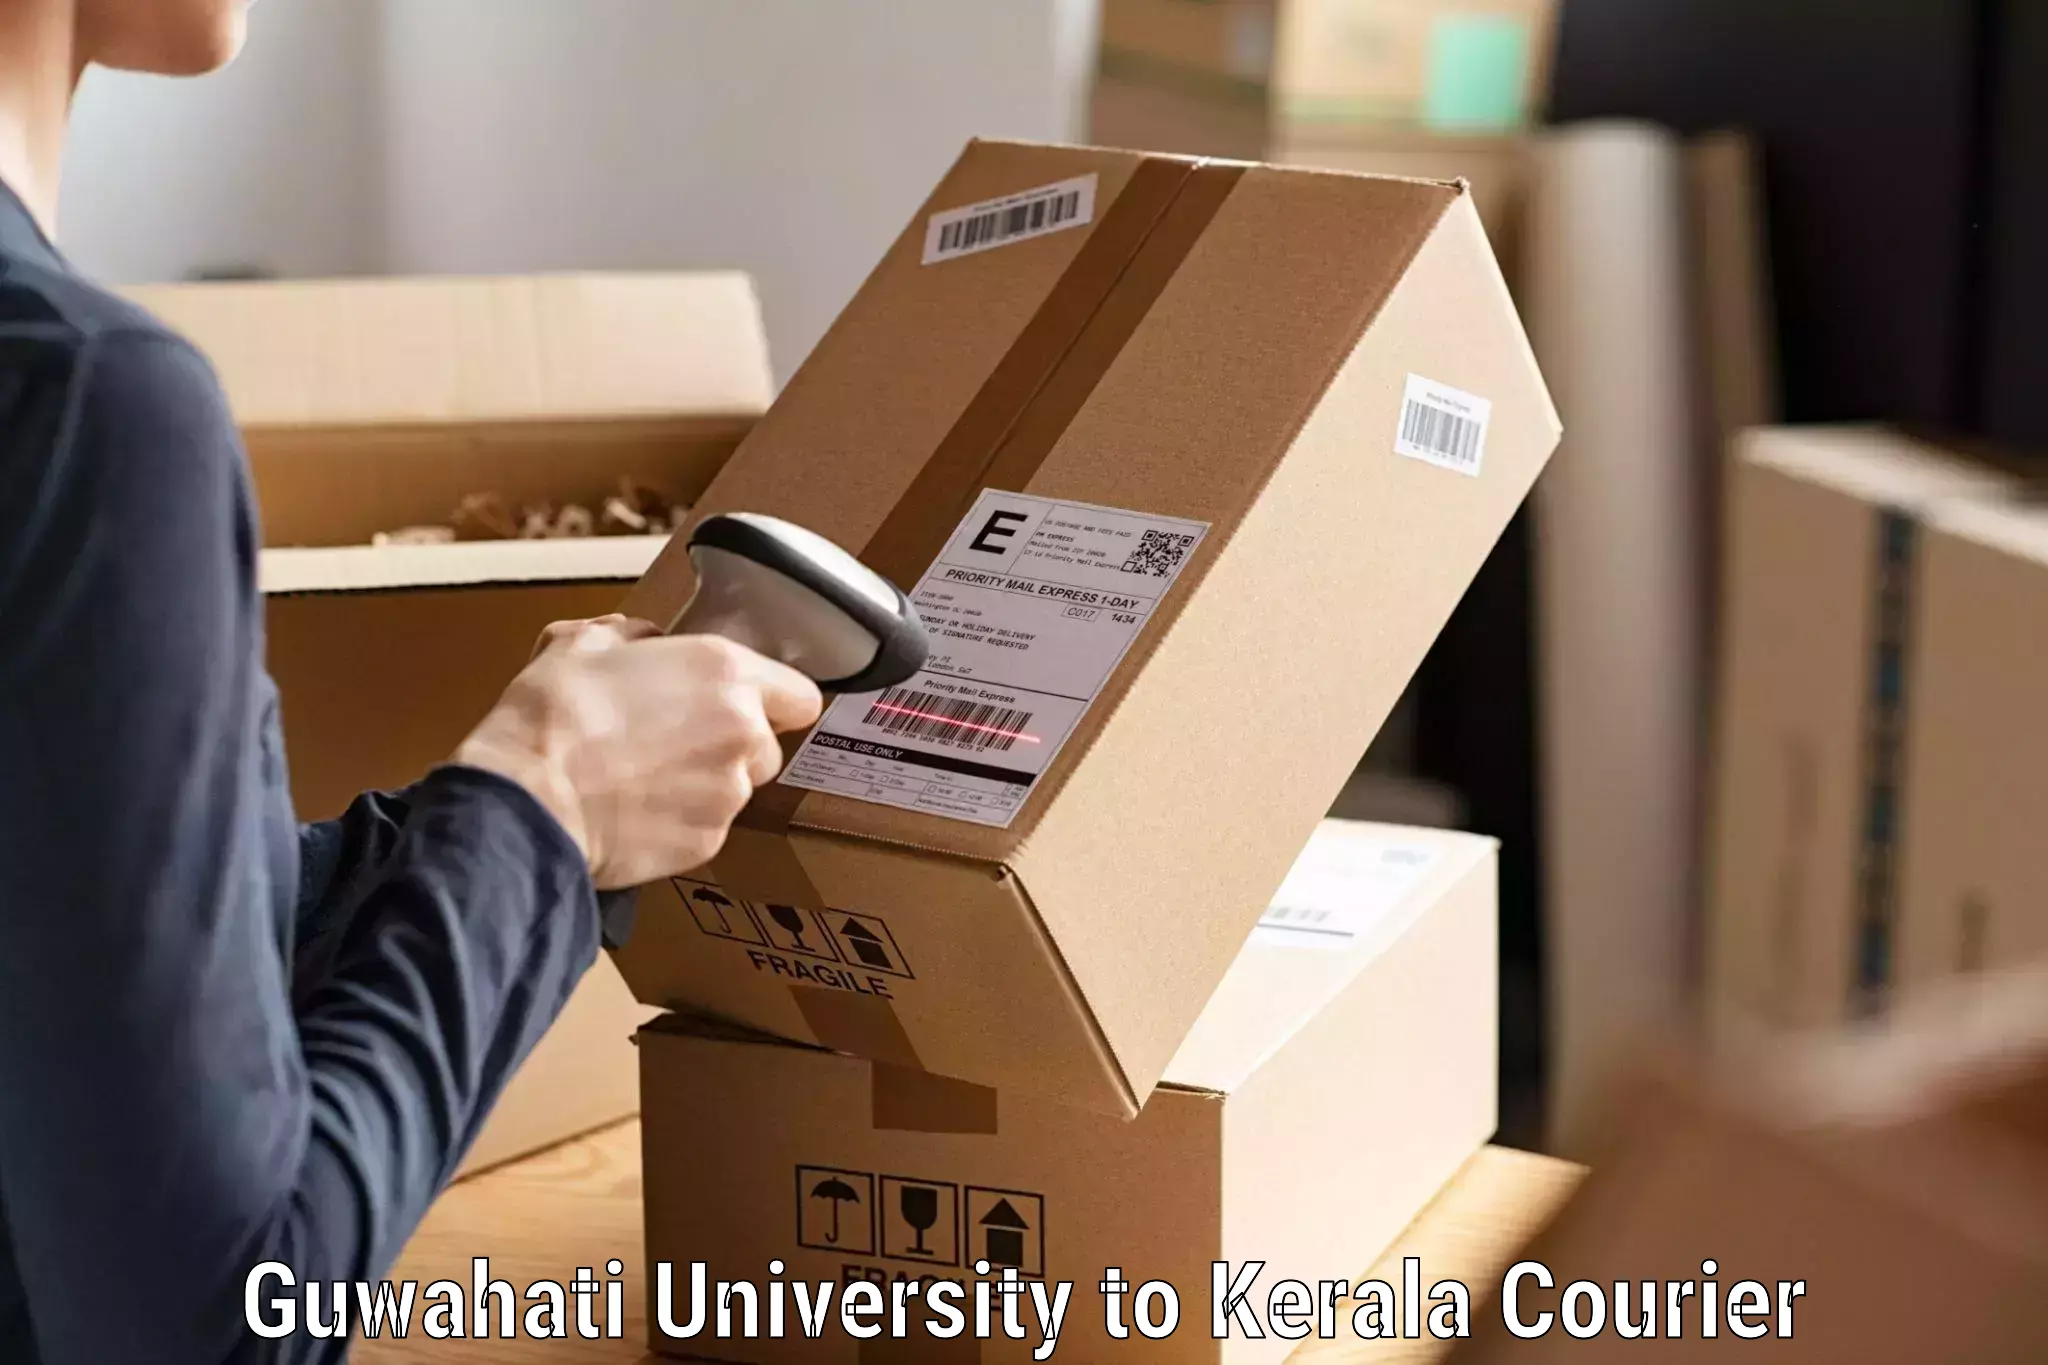 Cost-effective freight solutions Guwahati University to Kerala